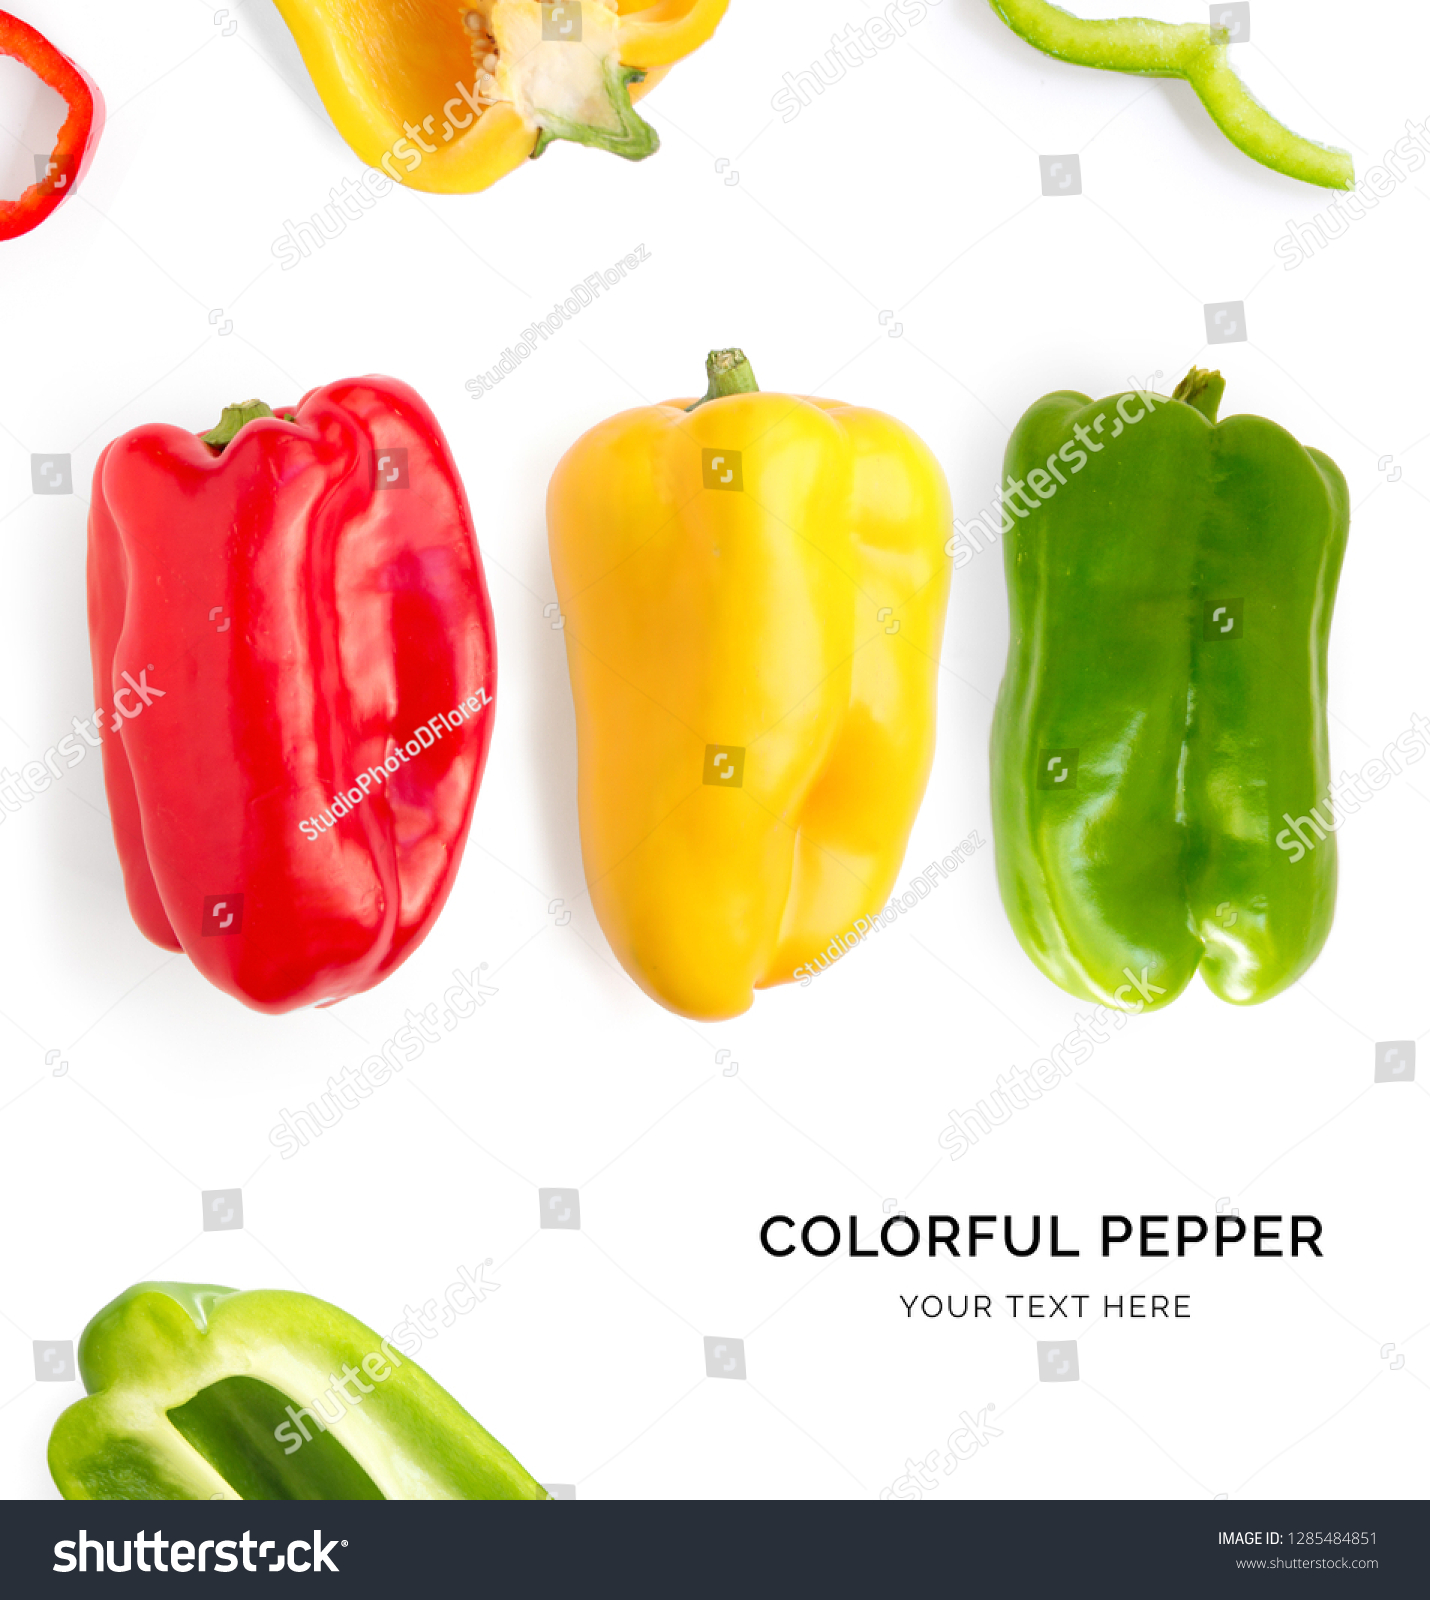 Creative layout made of green, red and yellow pepper on white background. Flat lay. Food concept. Colourful pepper on white background. #1285484851